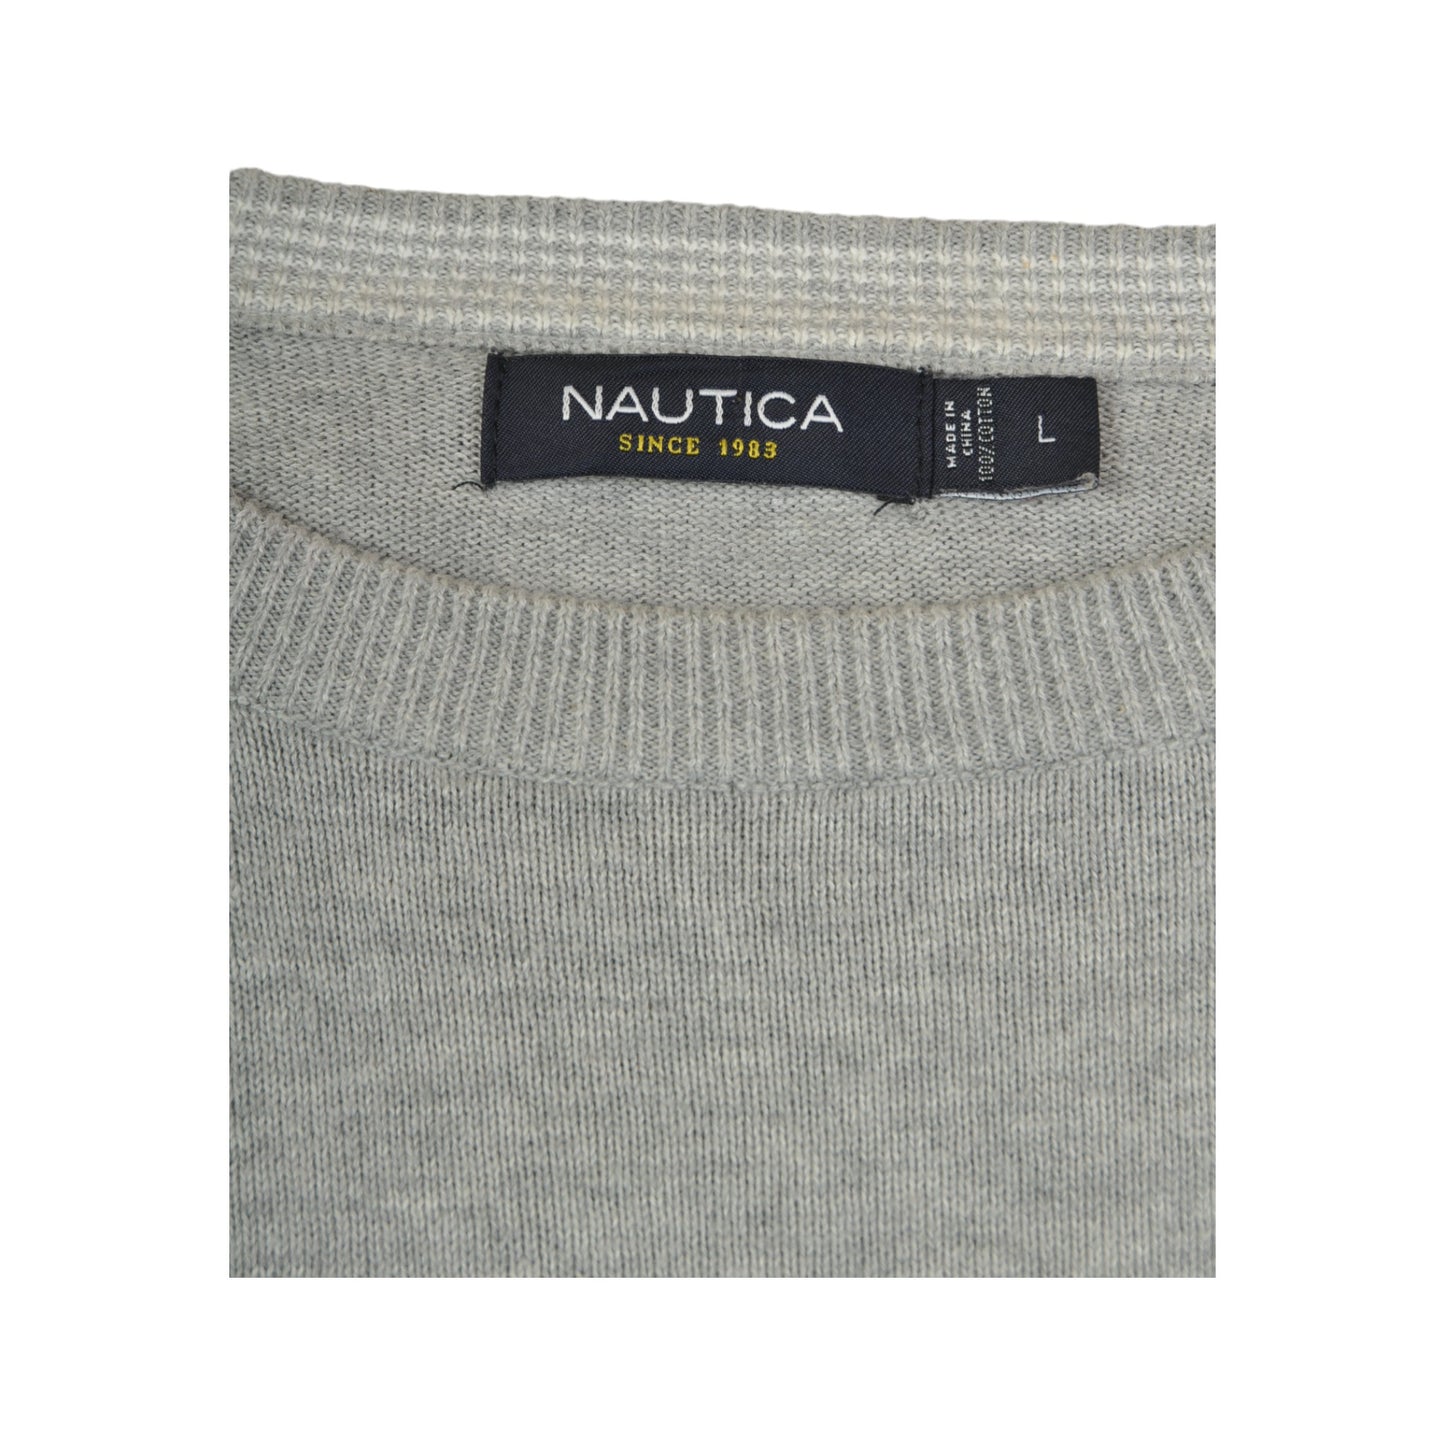 Vintage Nautica Knit Pullover Sweater Grey Large